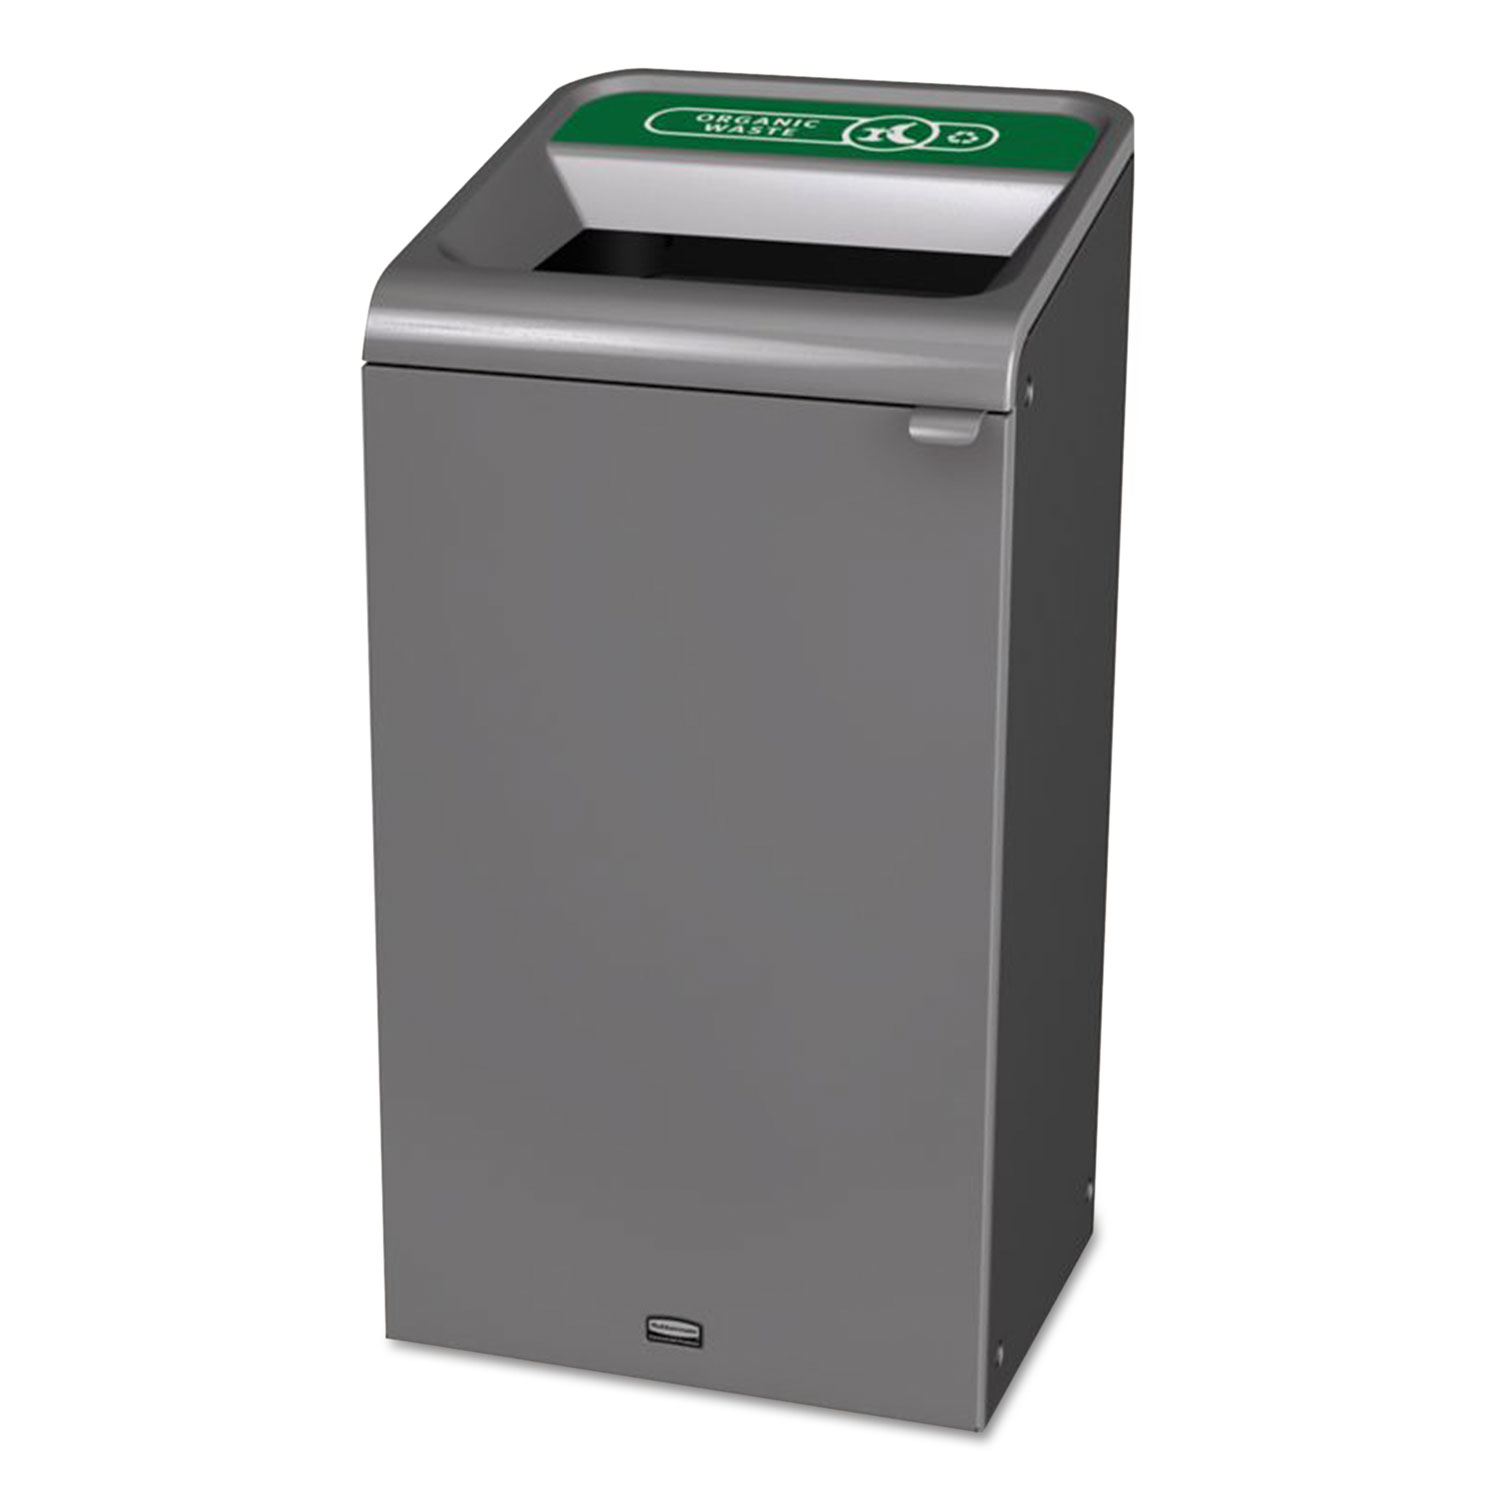 Configure Indoor Recycling Waste Receptacle, 23 gal, Gray, Organic Waste